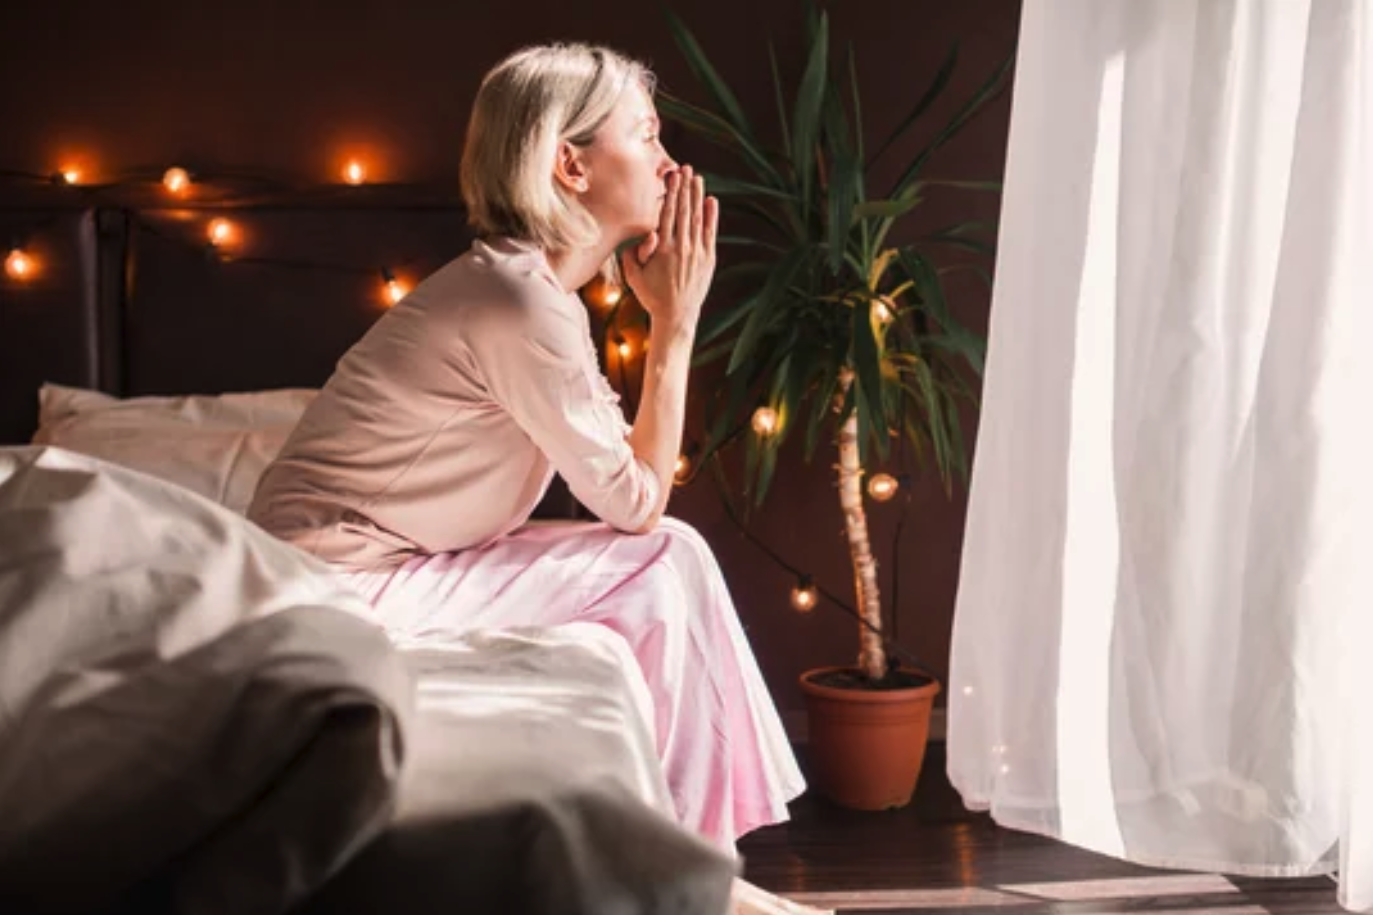 A contemplative woman in a pink nightgown sits on the bed, hands together in reflection, gazing toward a softly-lit window with a potted plant in the background, creating a tranquil atmosphere. She is managing emotional stress.